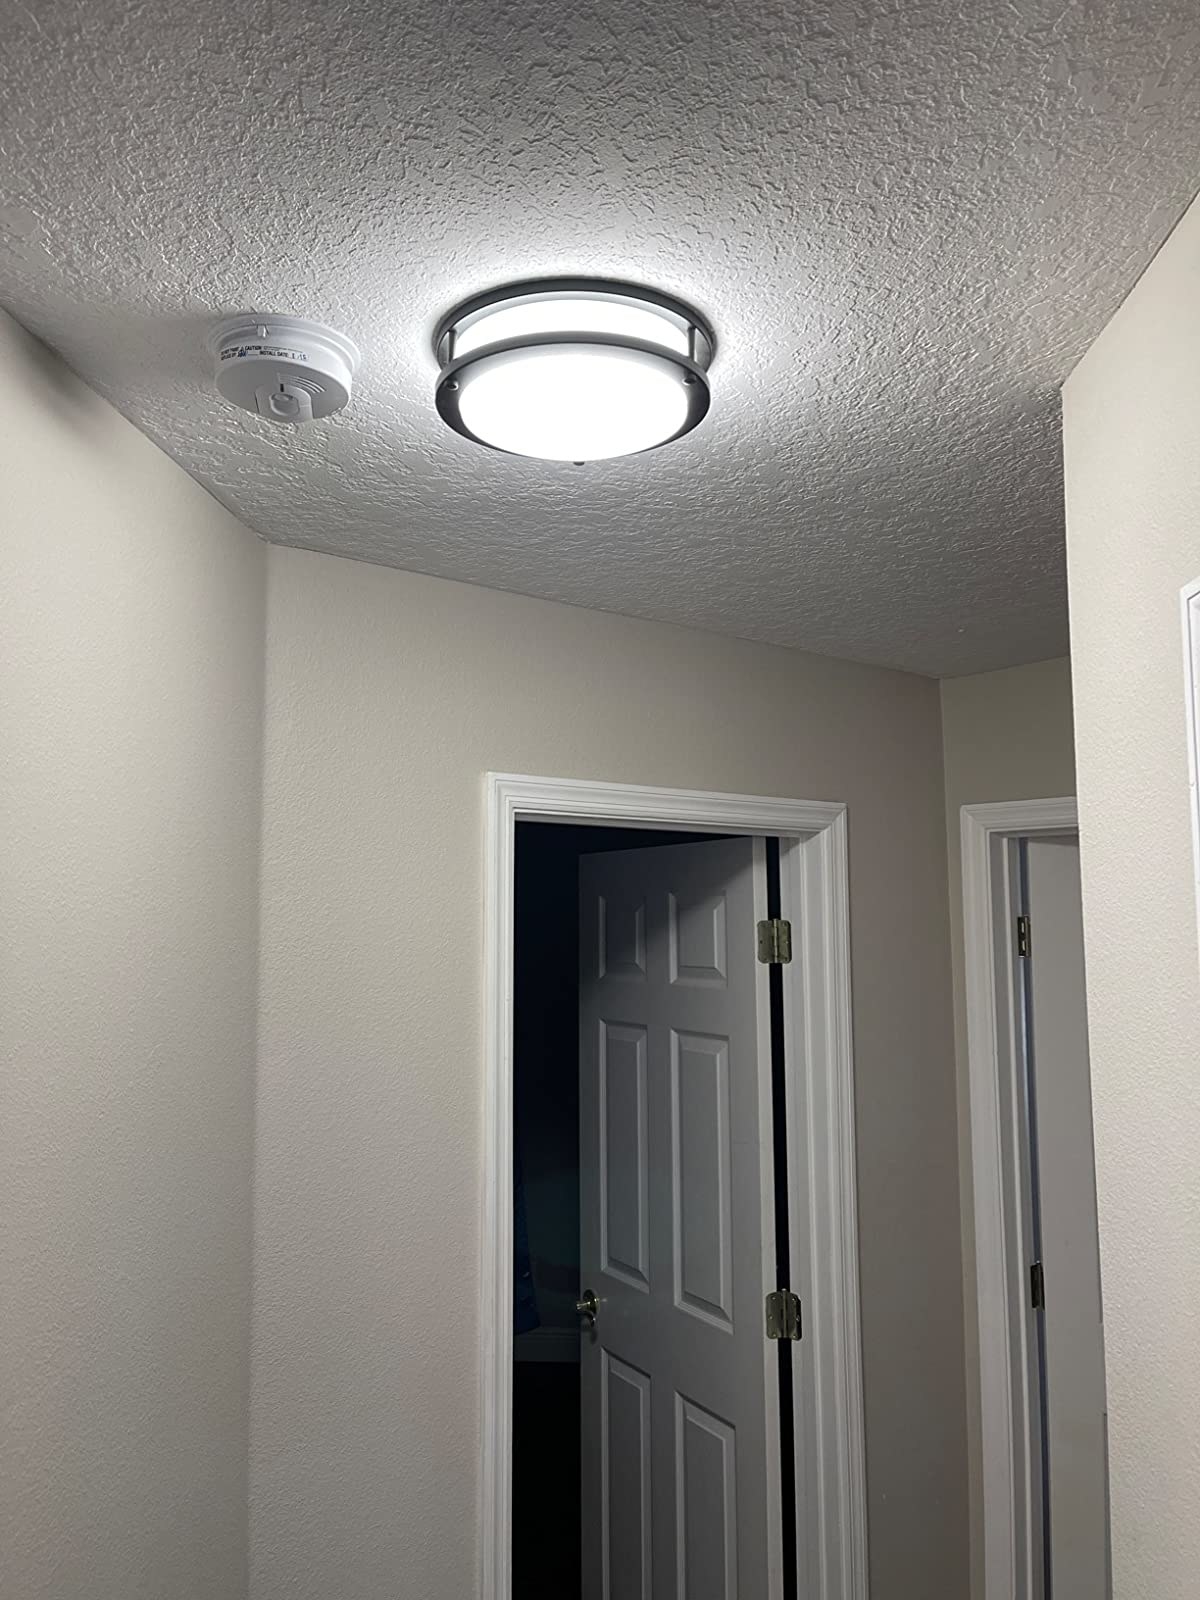 A ceiling mounted LED light brightening up a dark hallway